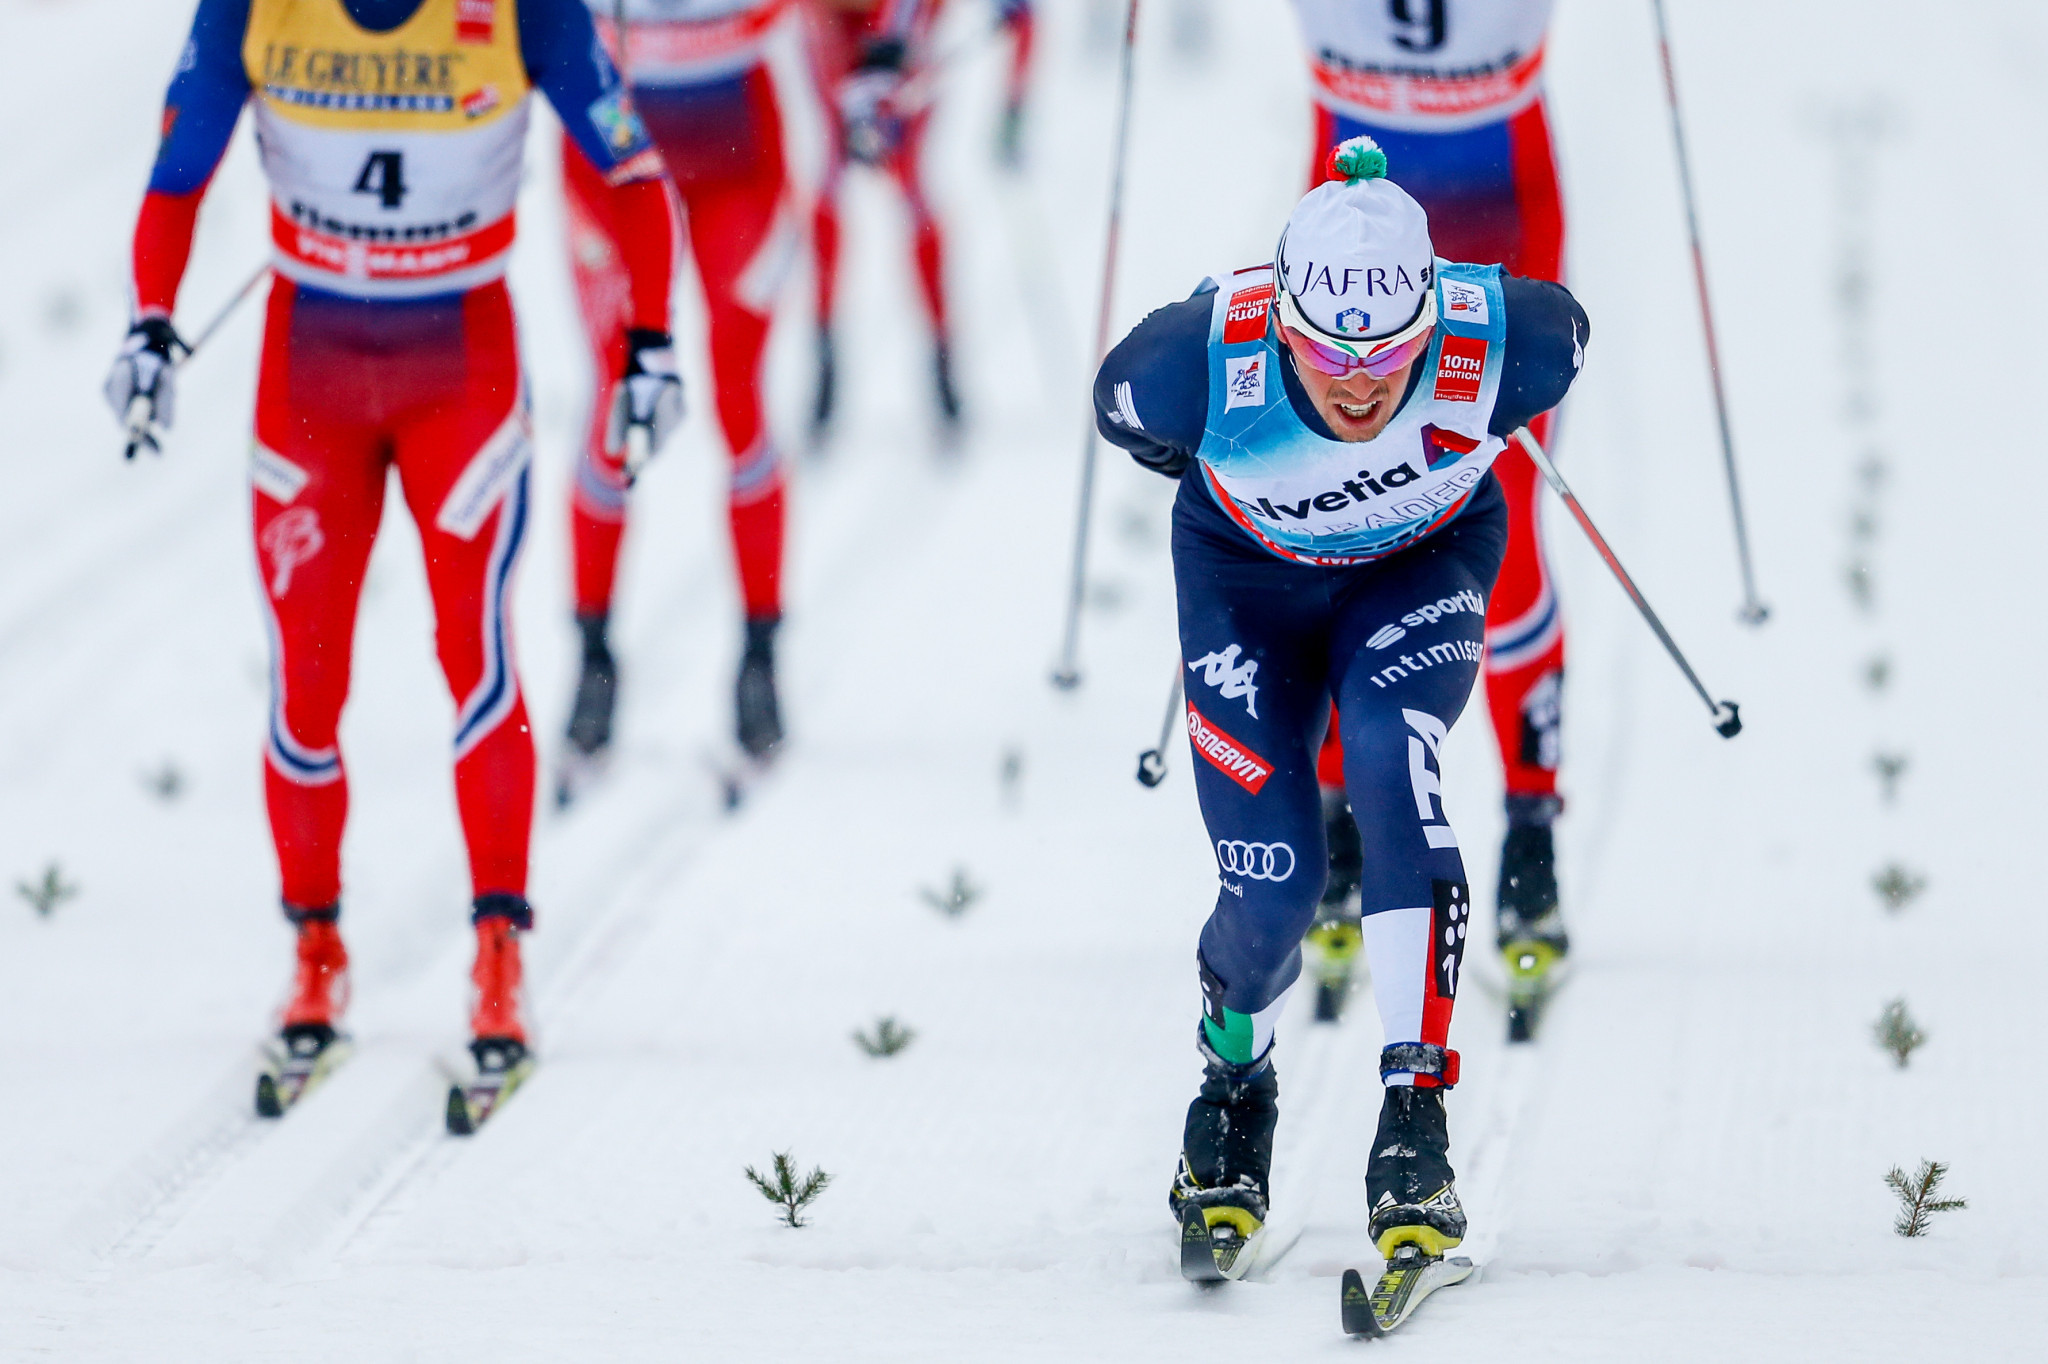 Italy make two key cross-country skiing appointments